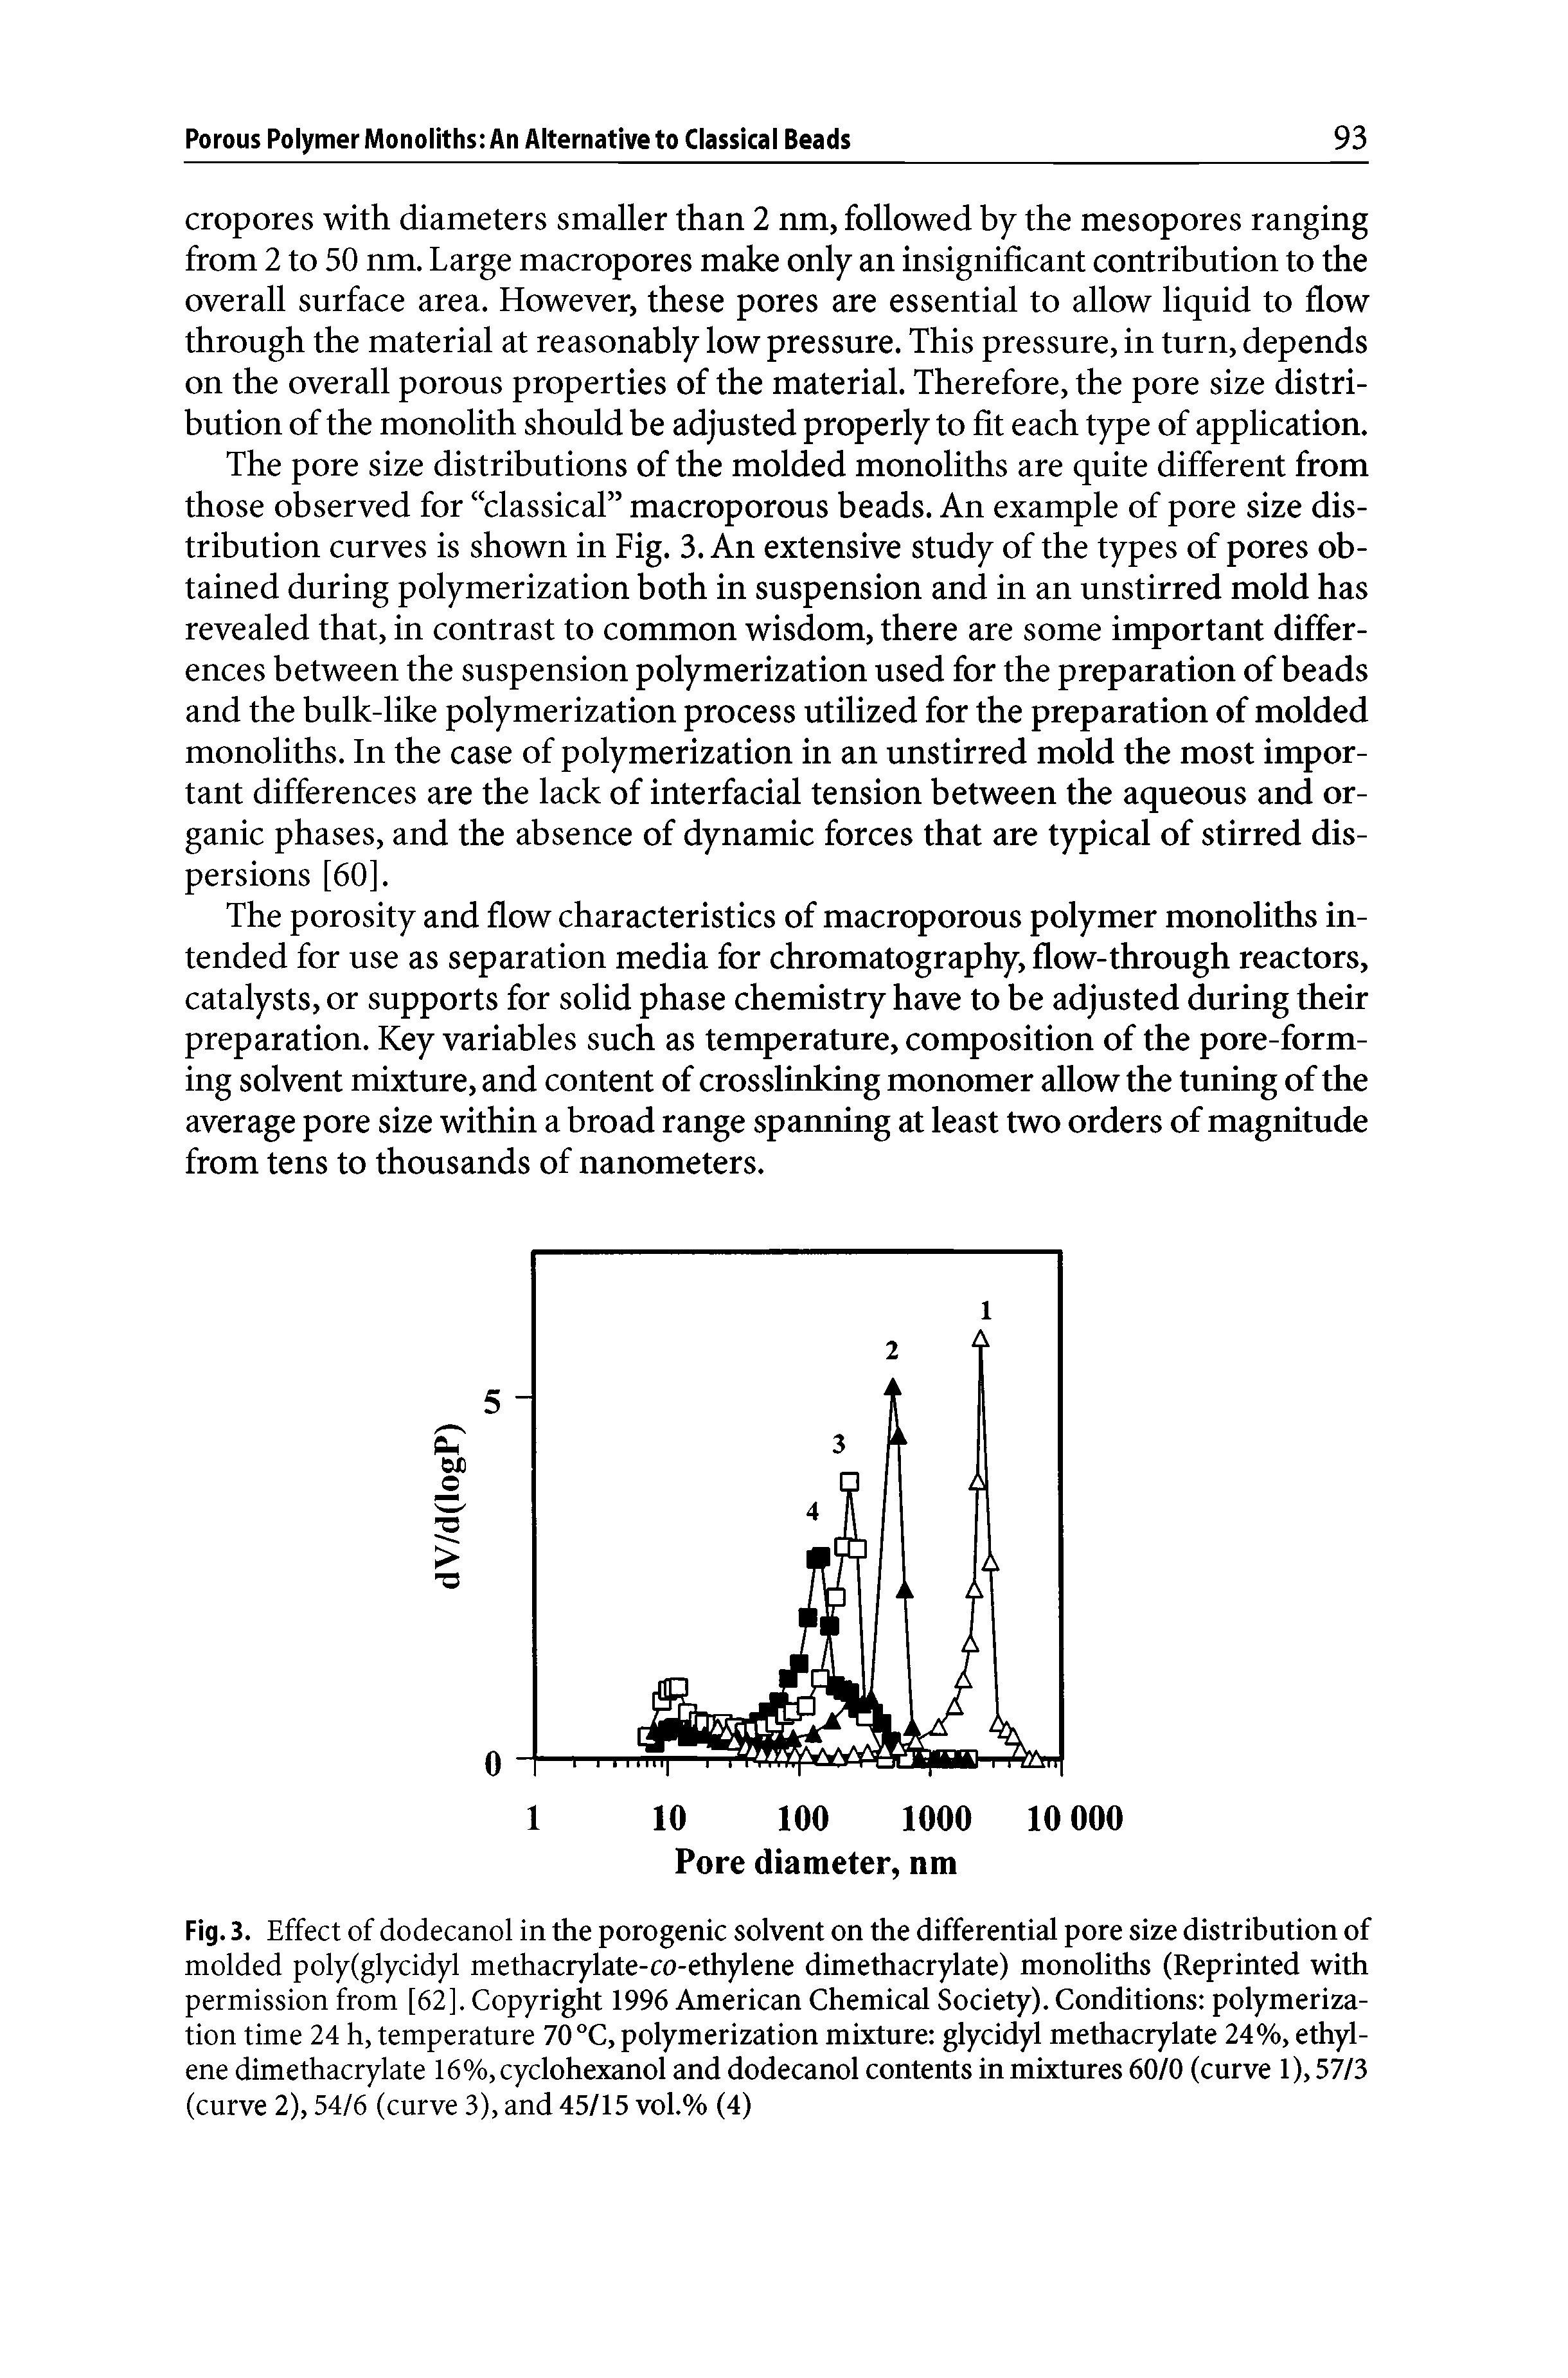 Fig. 3. Effect of dodecanol in the porogenic solvent on the differential pore size distribution of molded poly(glycidyl methacrylate-co-ethylene dimethacrylate) monoliths (Reprinted with permission from [62]. Copyright 1996 American Chemical Society). Conditions polymerization time 24 h, temperature 70 °C, polymerization mixture glycidyl methacrylate 24%, ethylene dimethacrylate 16%, cyclohexanol and dodecanol contents in mixtures 60/0 (curve 1), 57/3 (curve 2), 54/6 (curve 3), and 45/15 vol.% (4)...